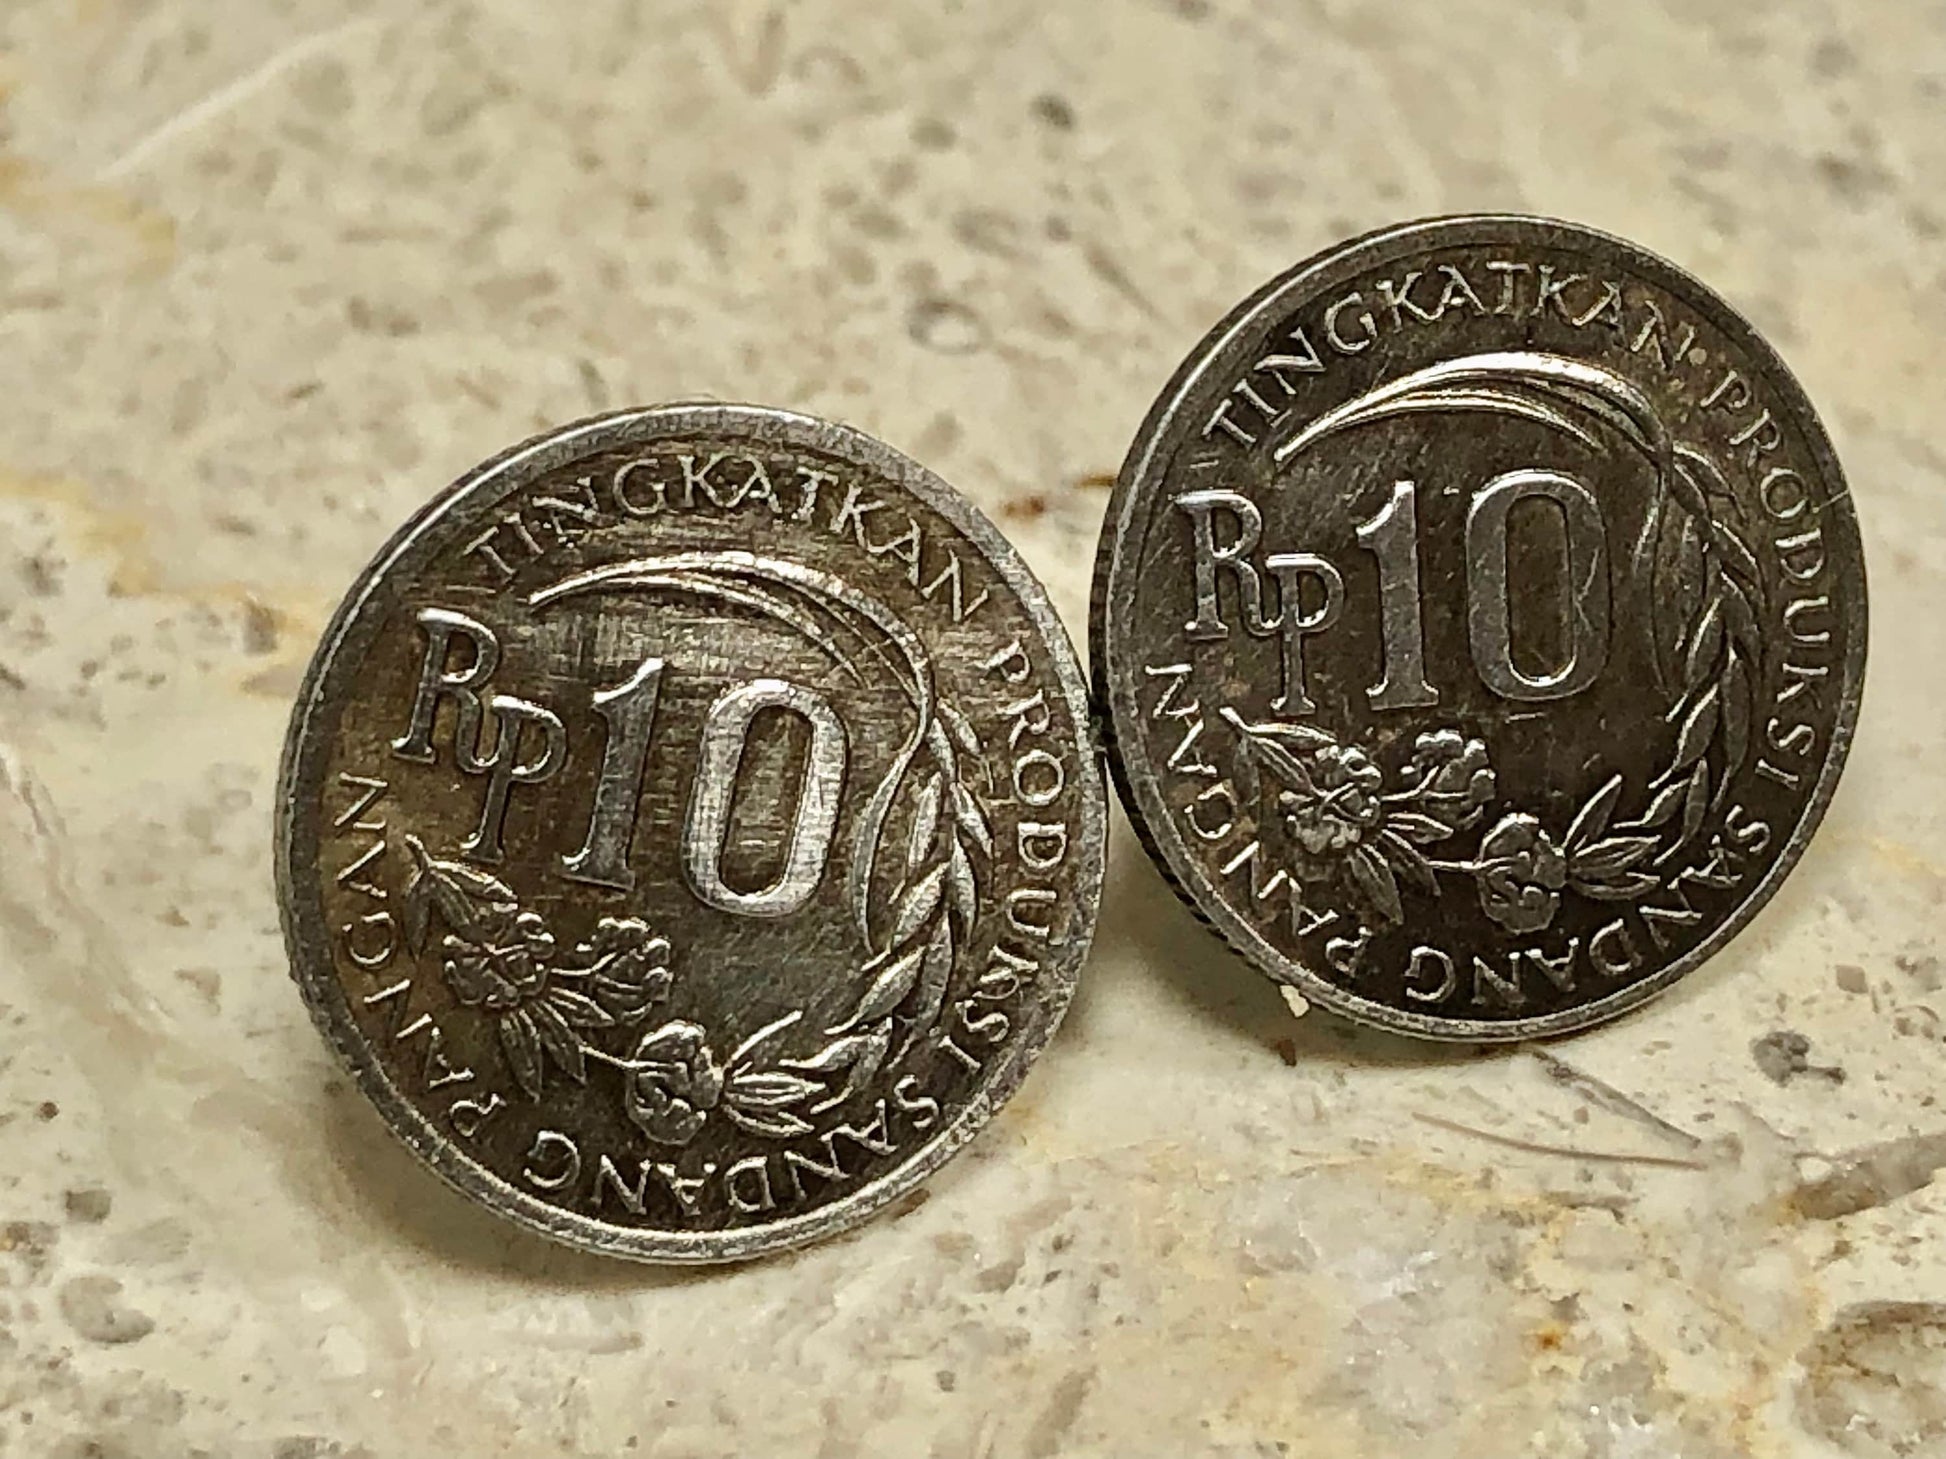 Indonesia 10 rupiah Coin Stud Earrings Set Indonesian Vintage Handmade Jewelry Gift Friend Charm For Him Her World Coin Collector